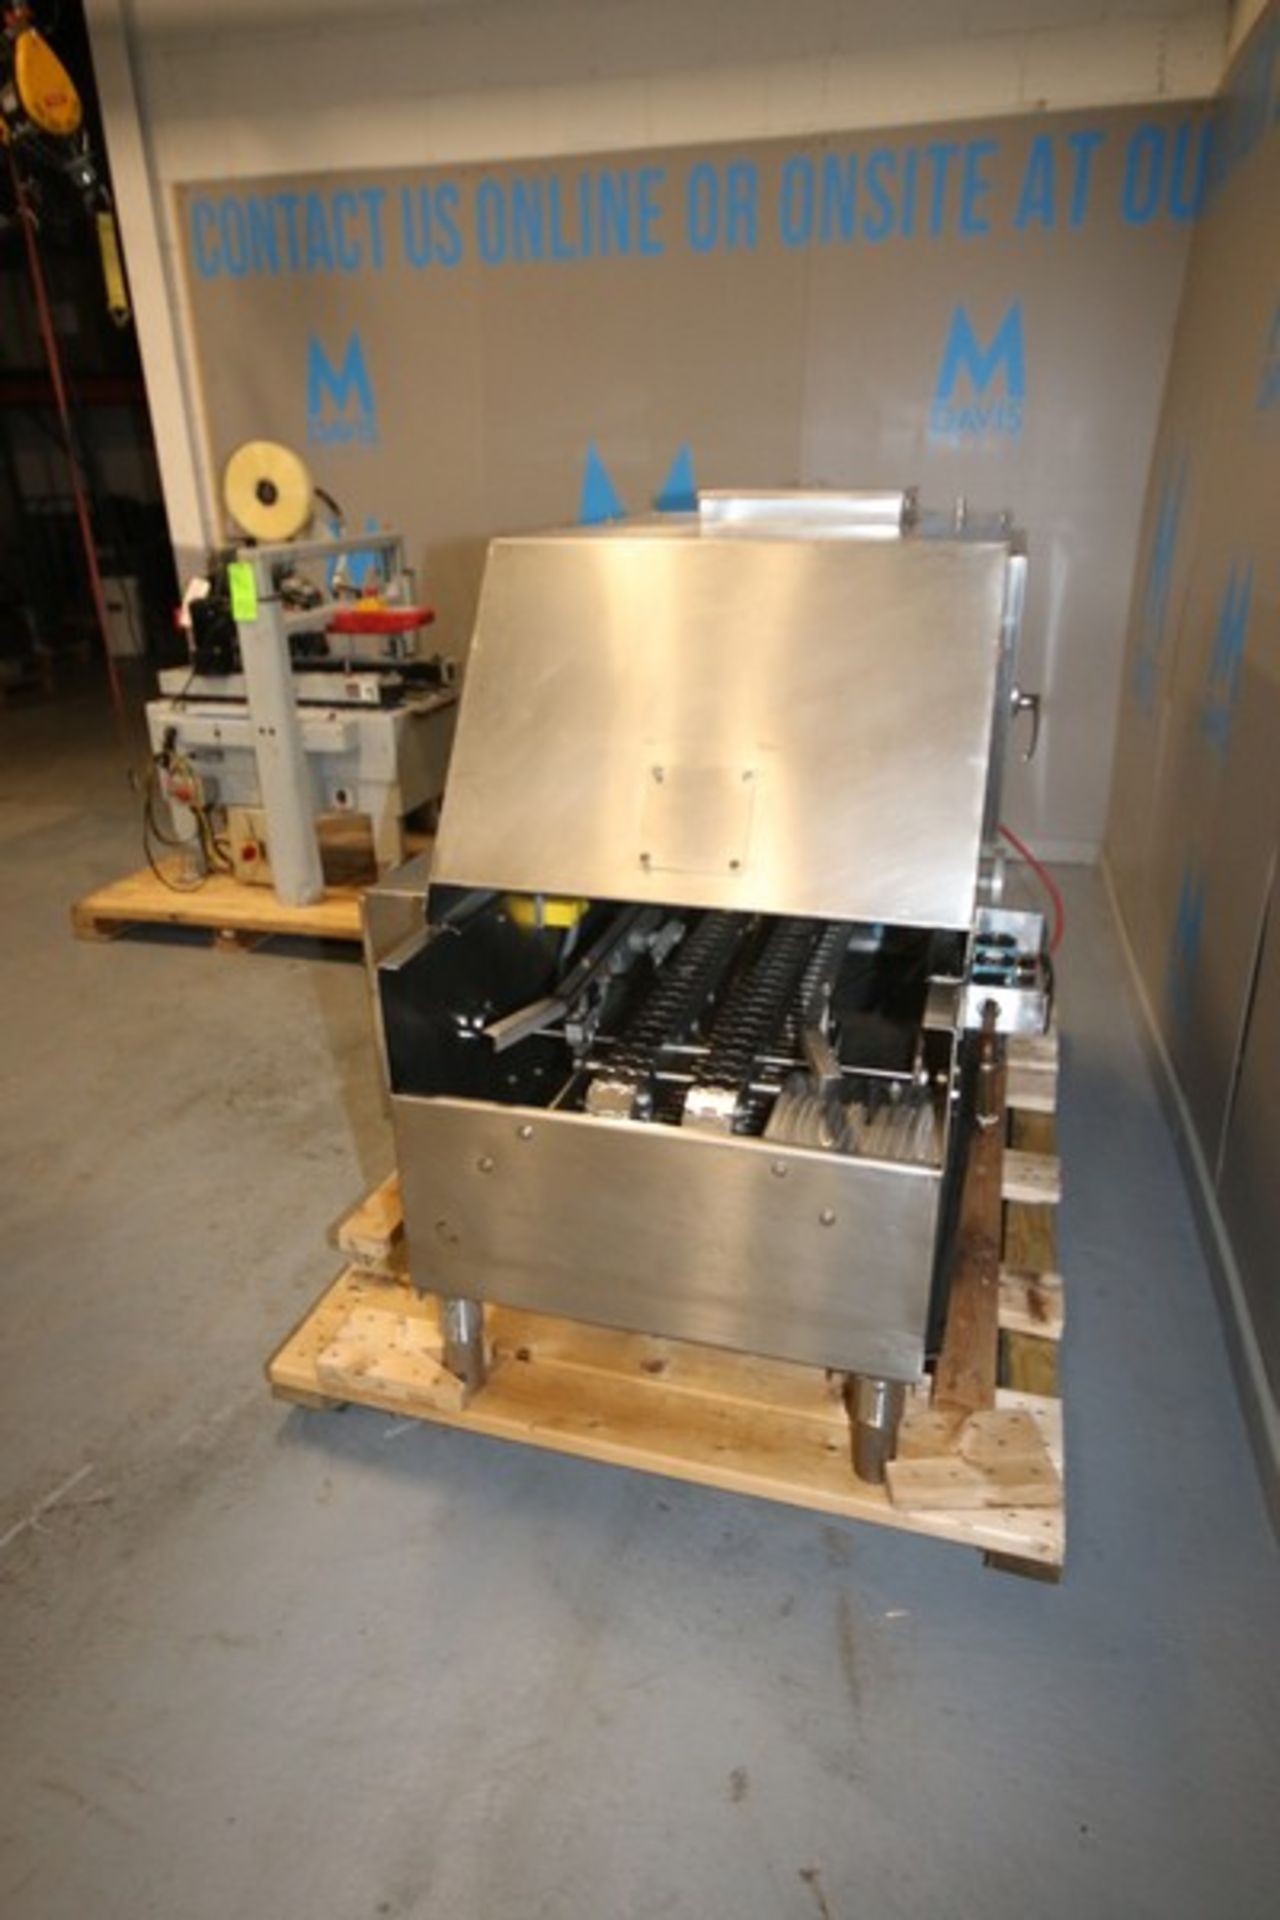 Mallet S/S Bread Pan Oiler, M/N 2001A, S/N 243-456, 460 Volts, 3 Phase, with Casters (INV#77729)( - Image 8 of 11